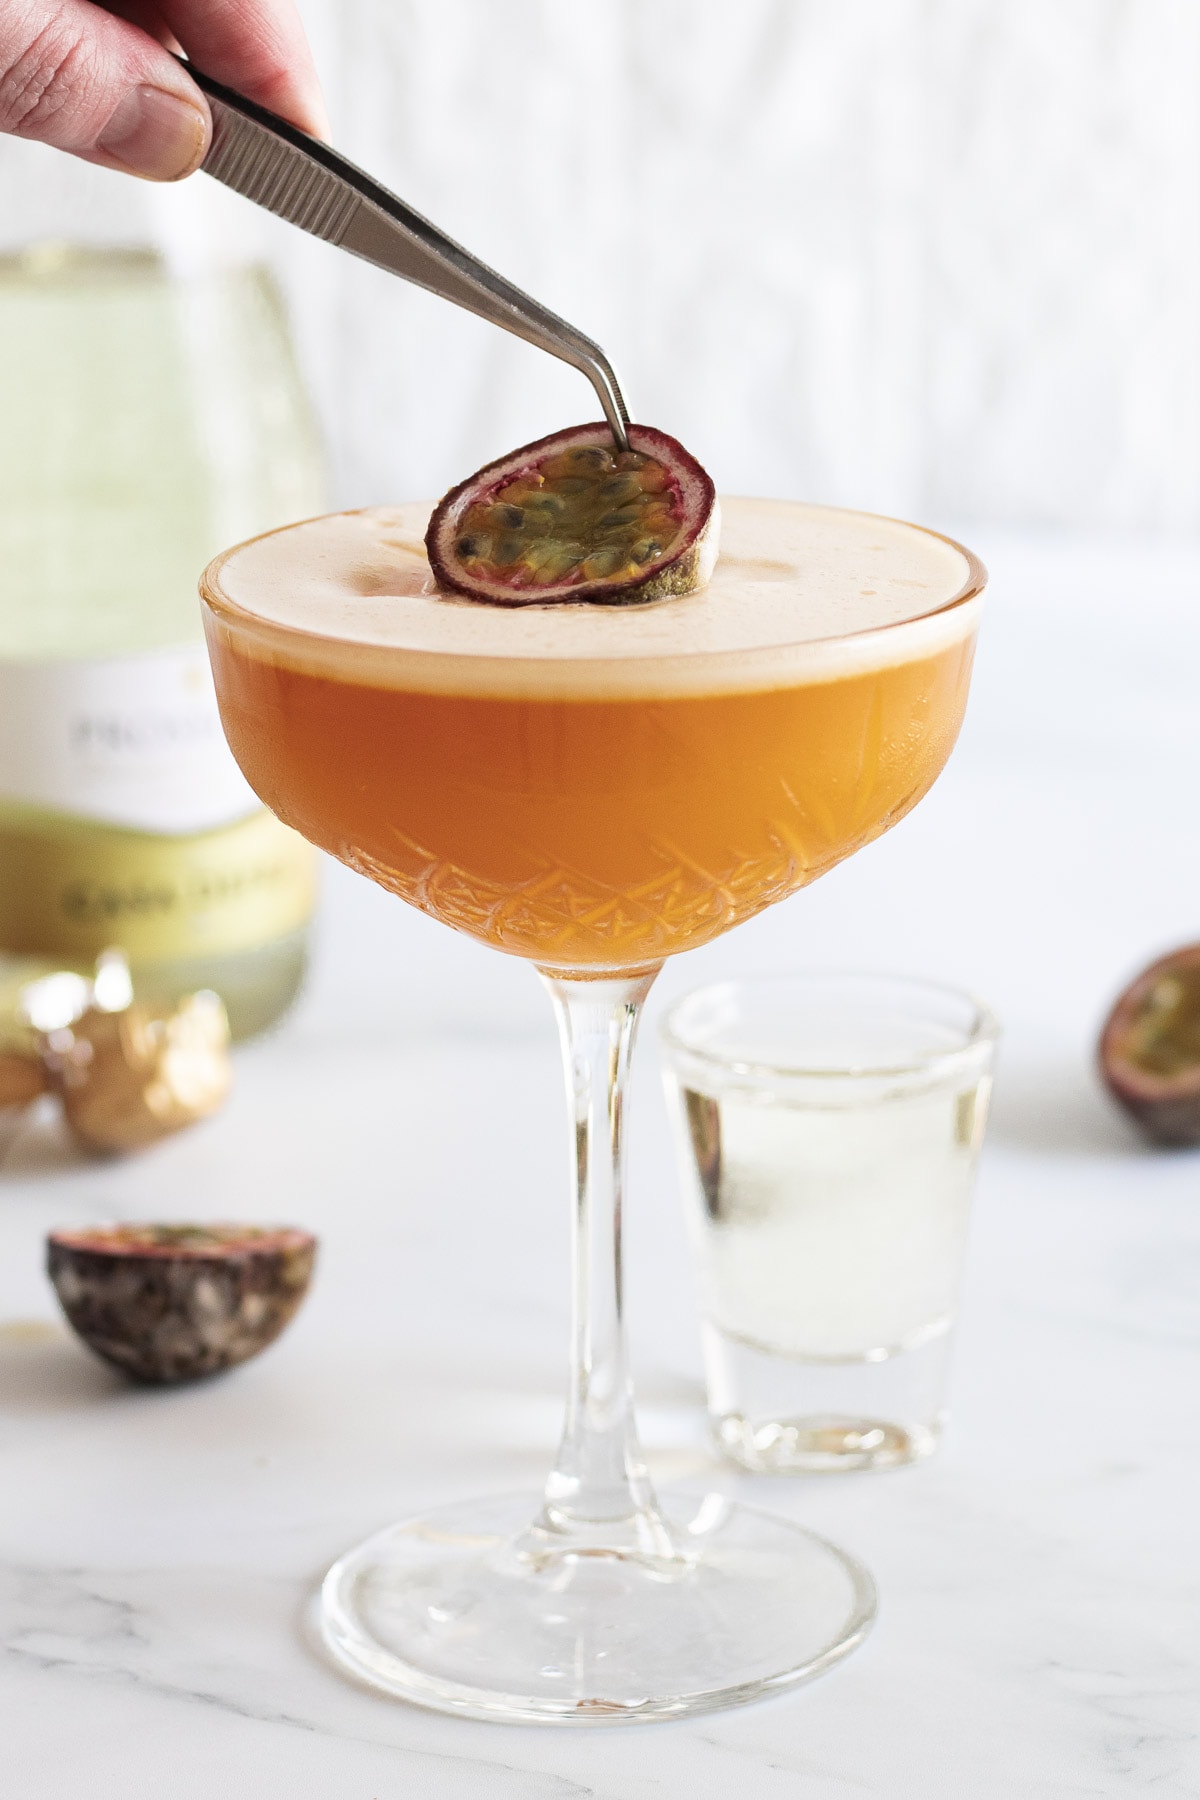 Passionfruit being placed on a pornstar martini